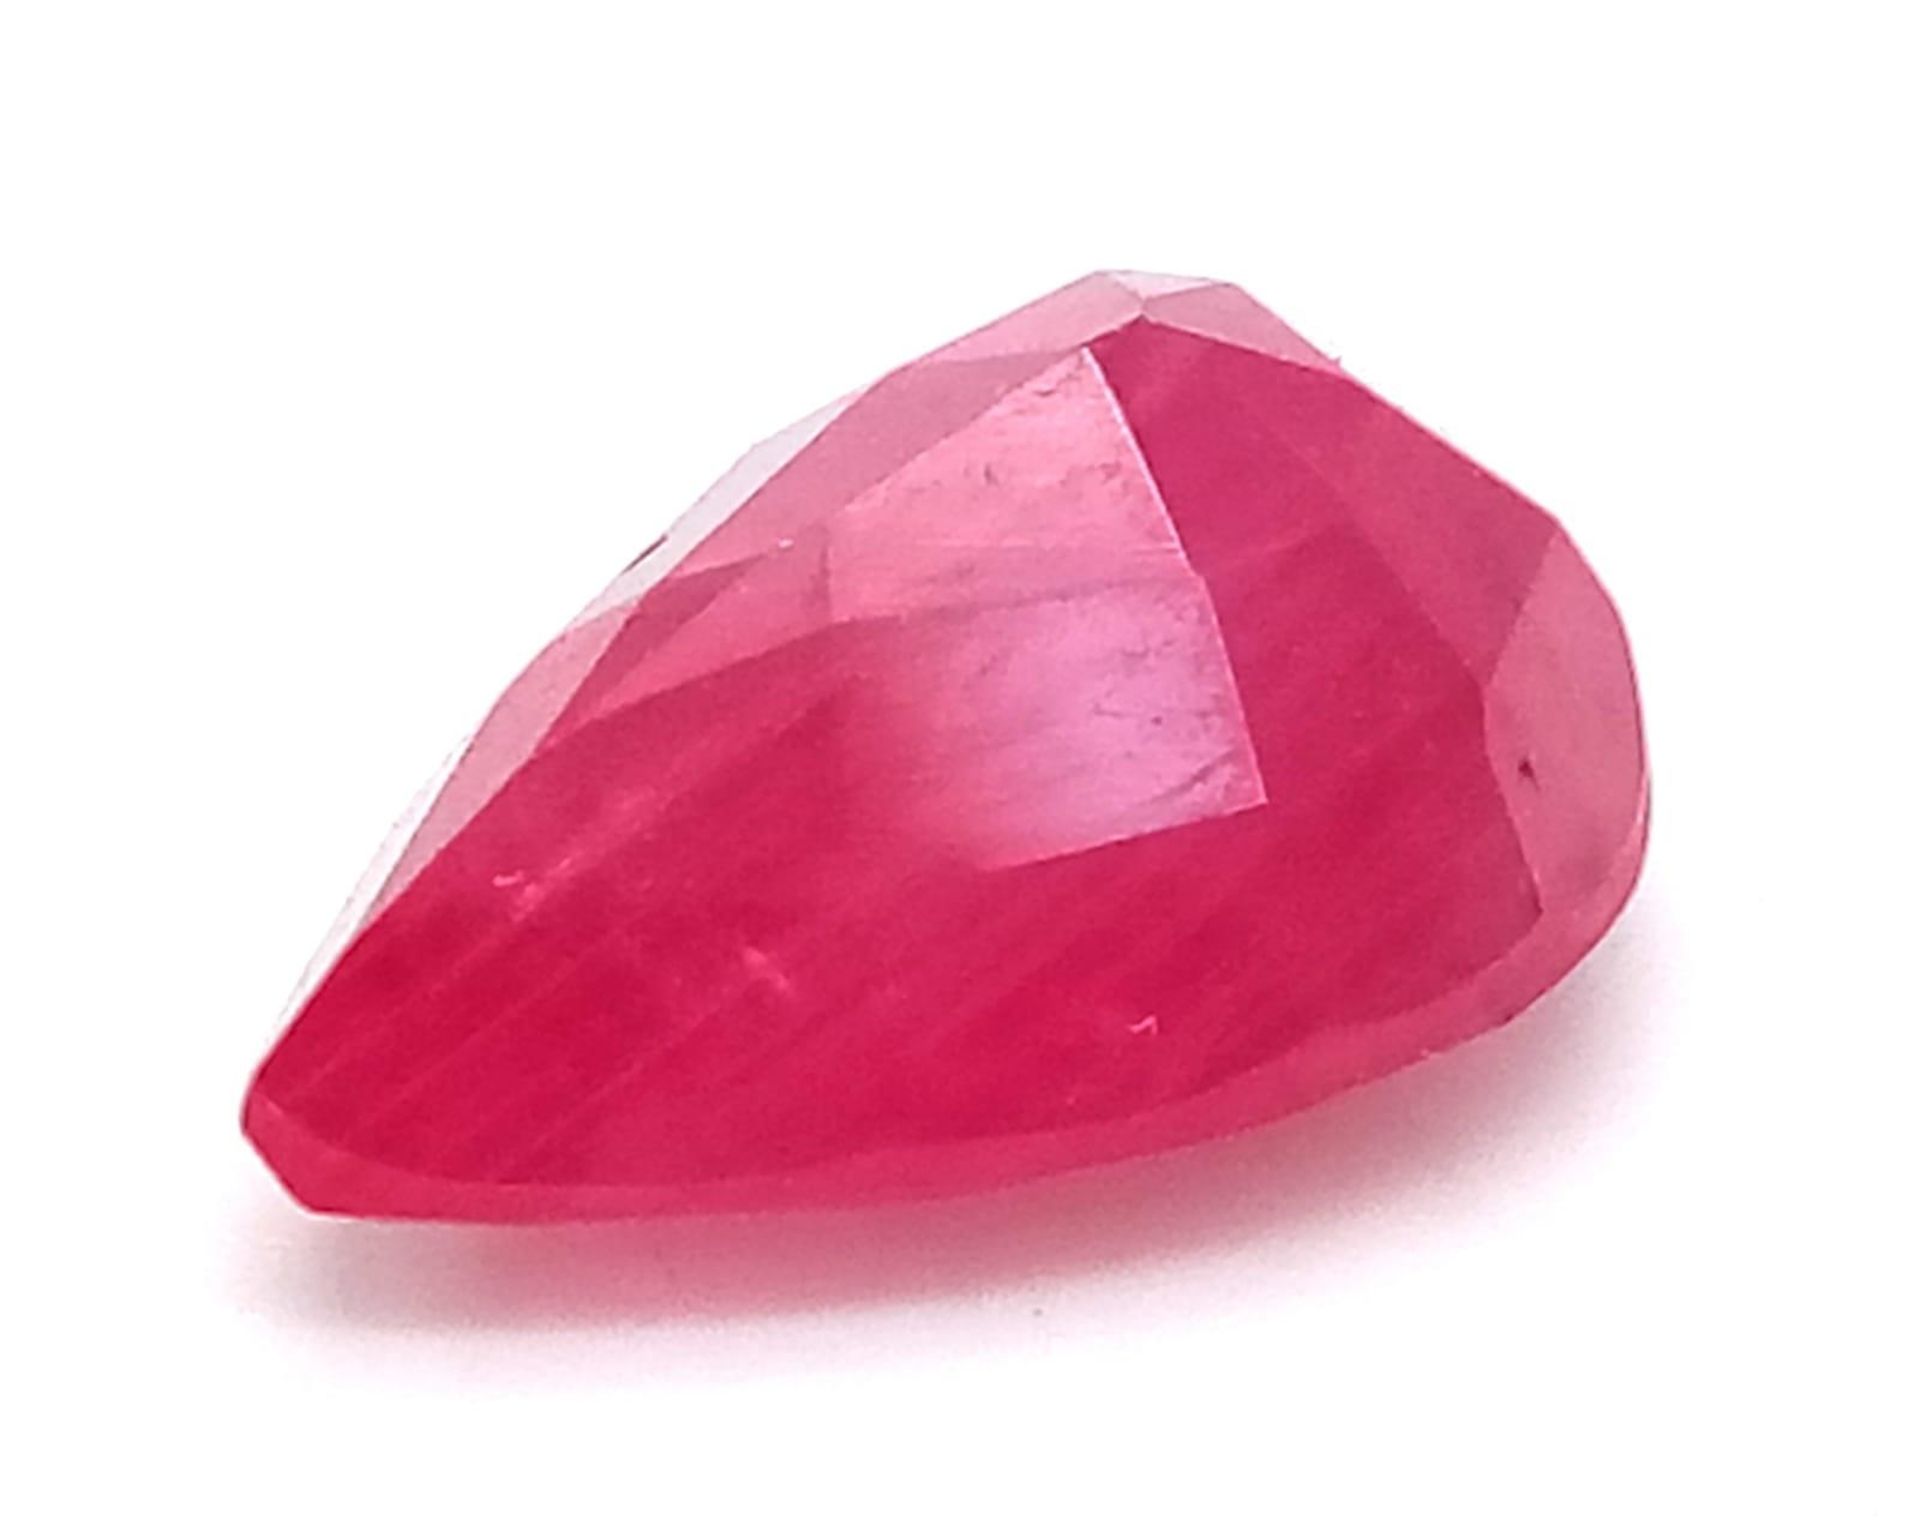 A 3.11ct Rare Mozambique Ruby Gemstone. GFCO Swiss Certified. - Image 2 of 4